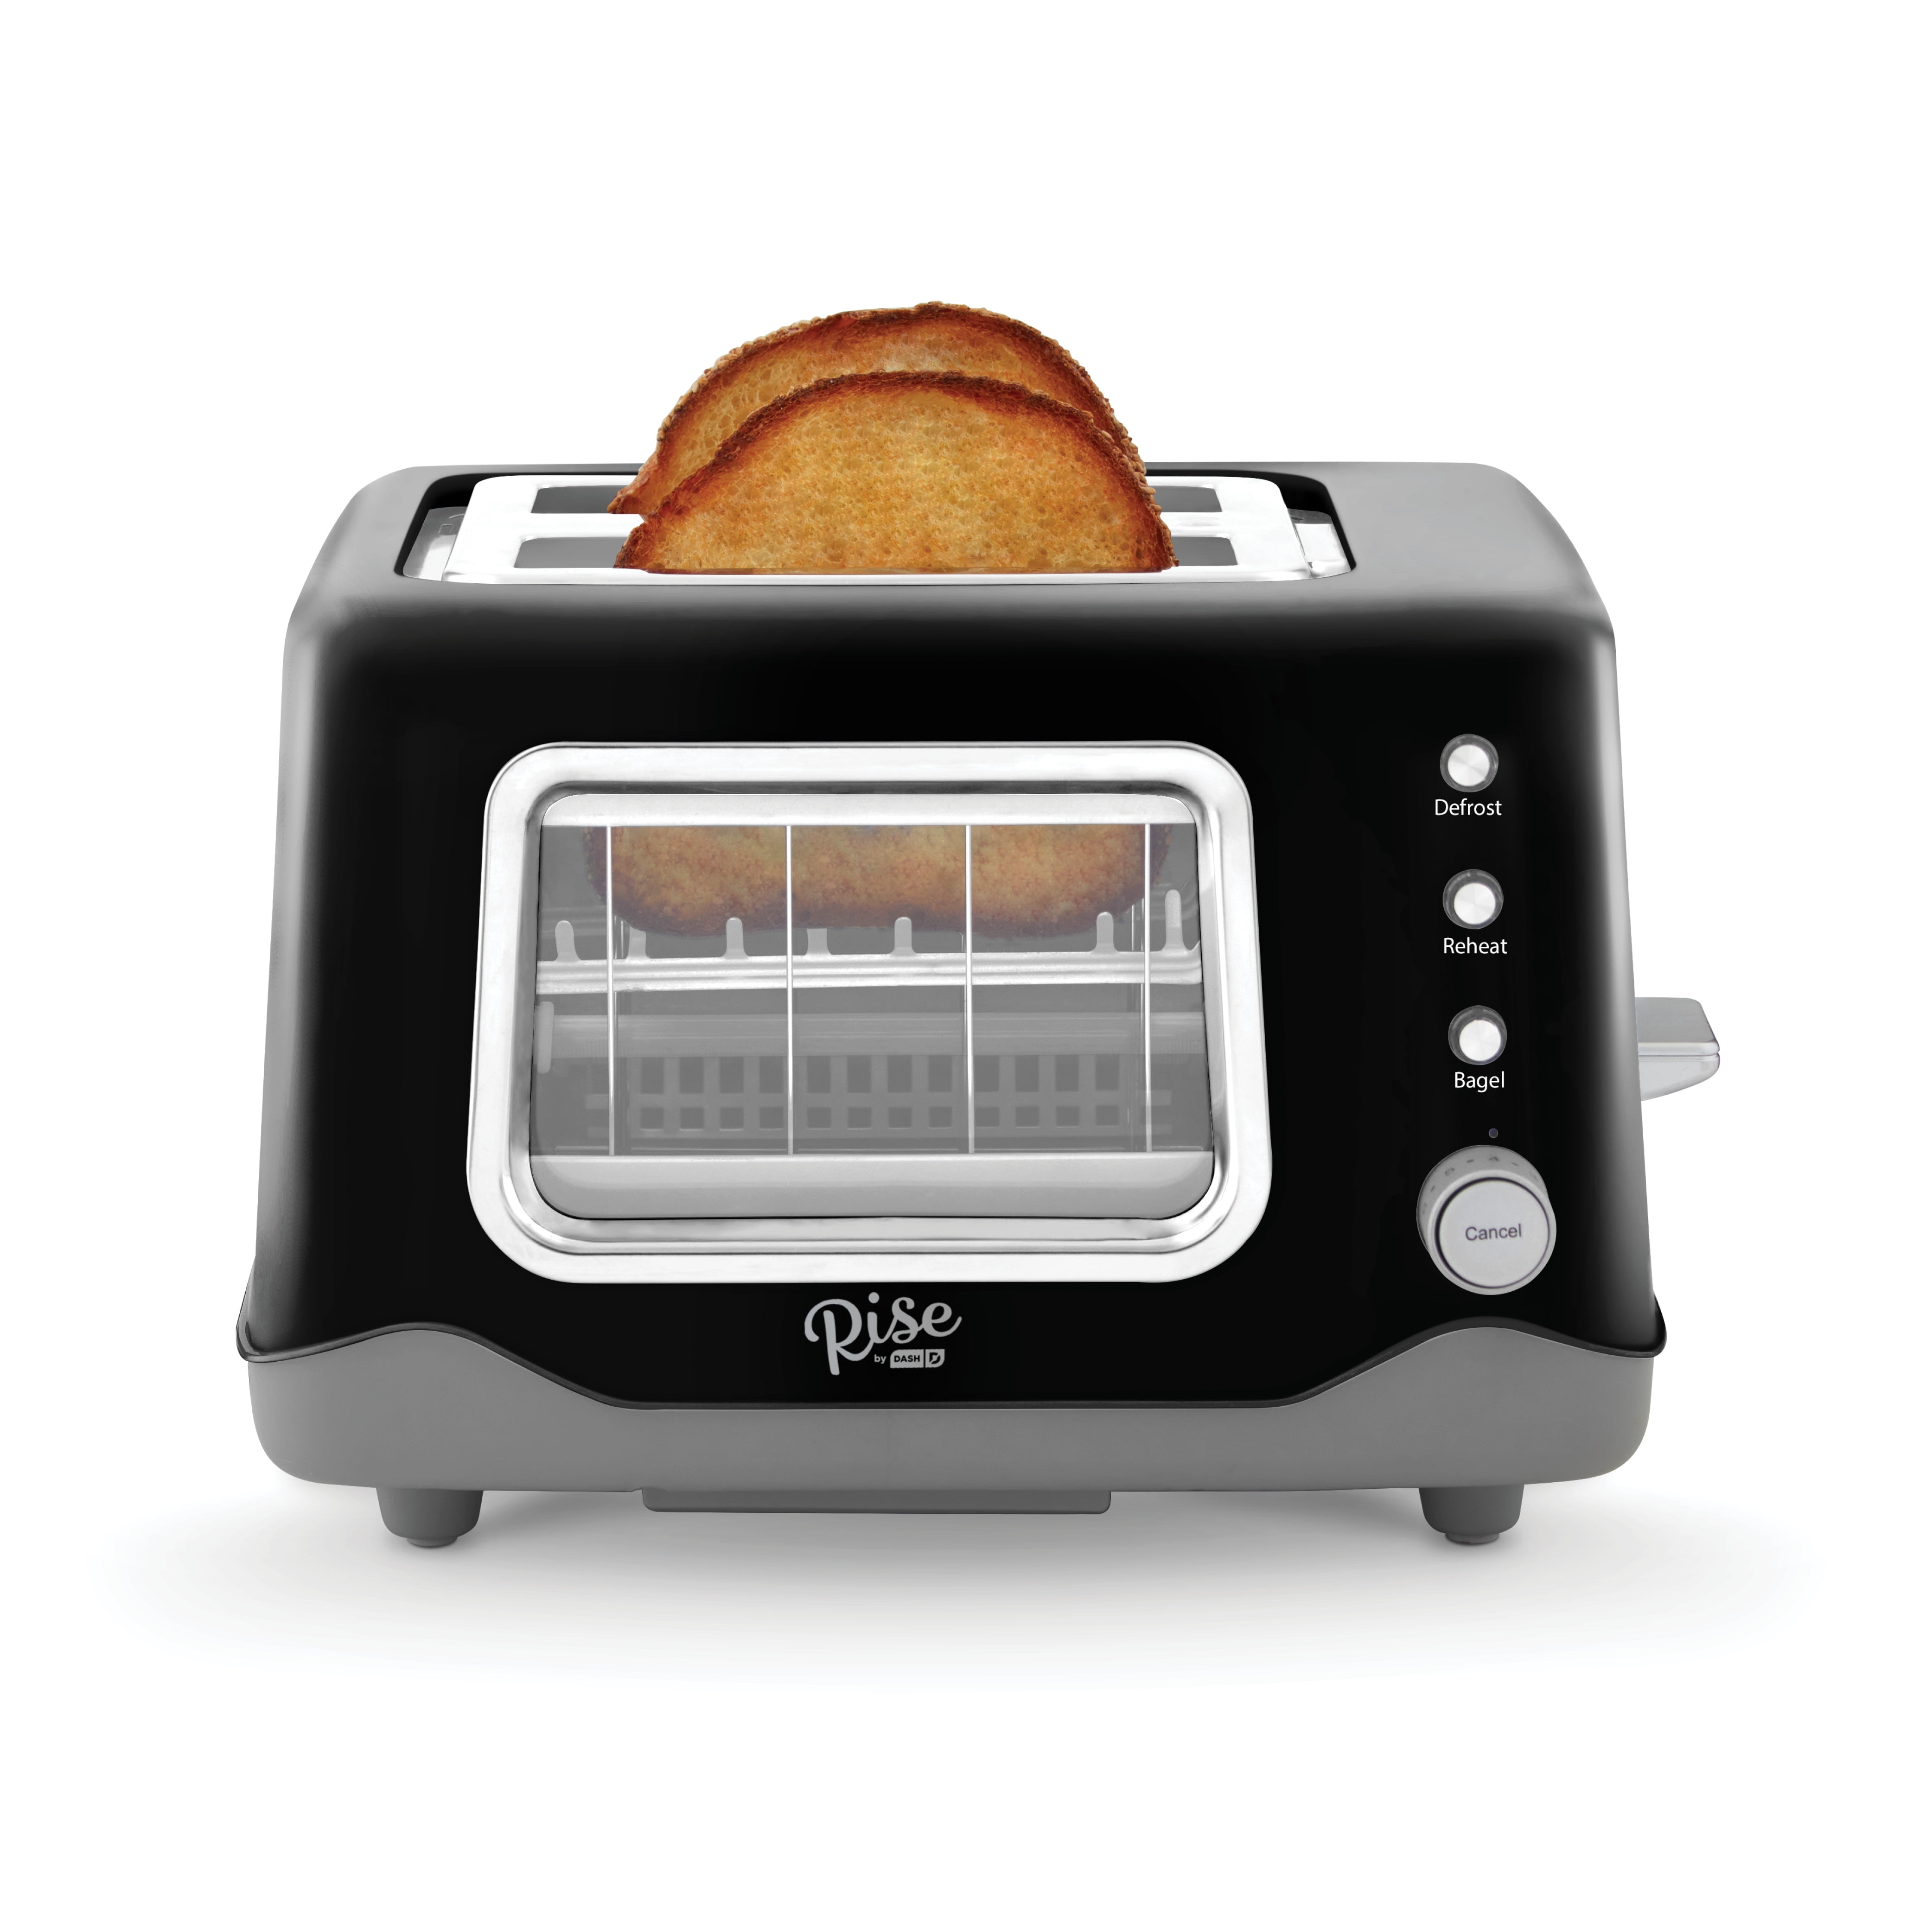 DASH, Clear View Toaster - Zola